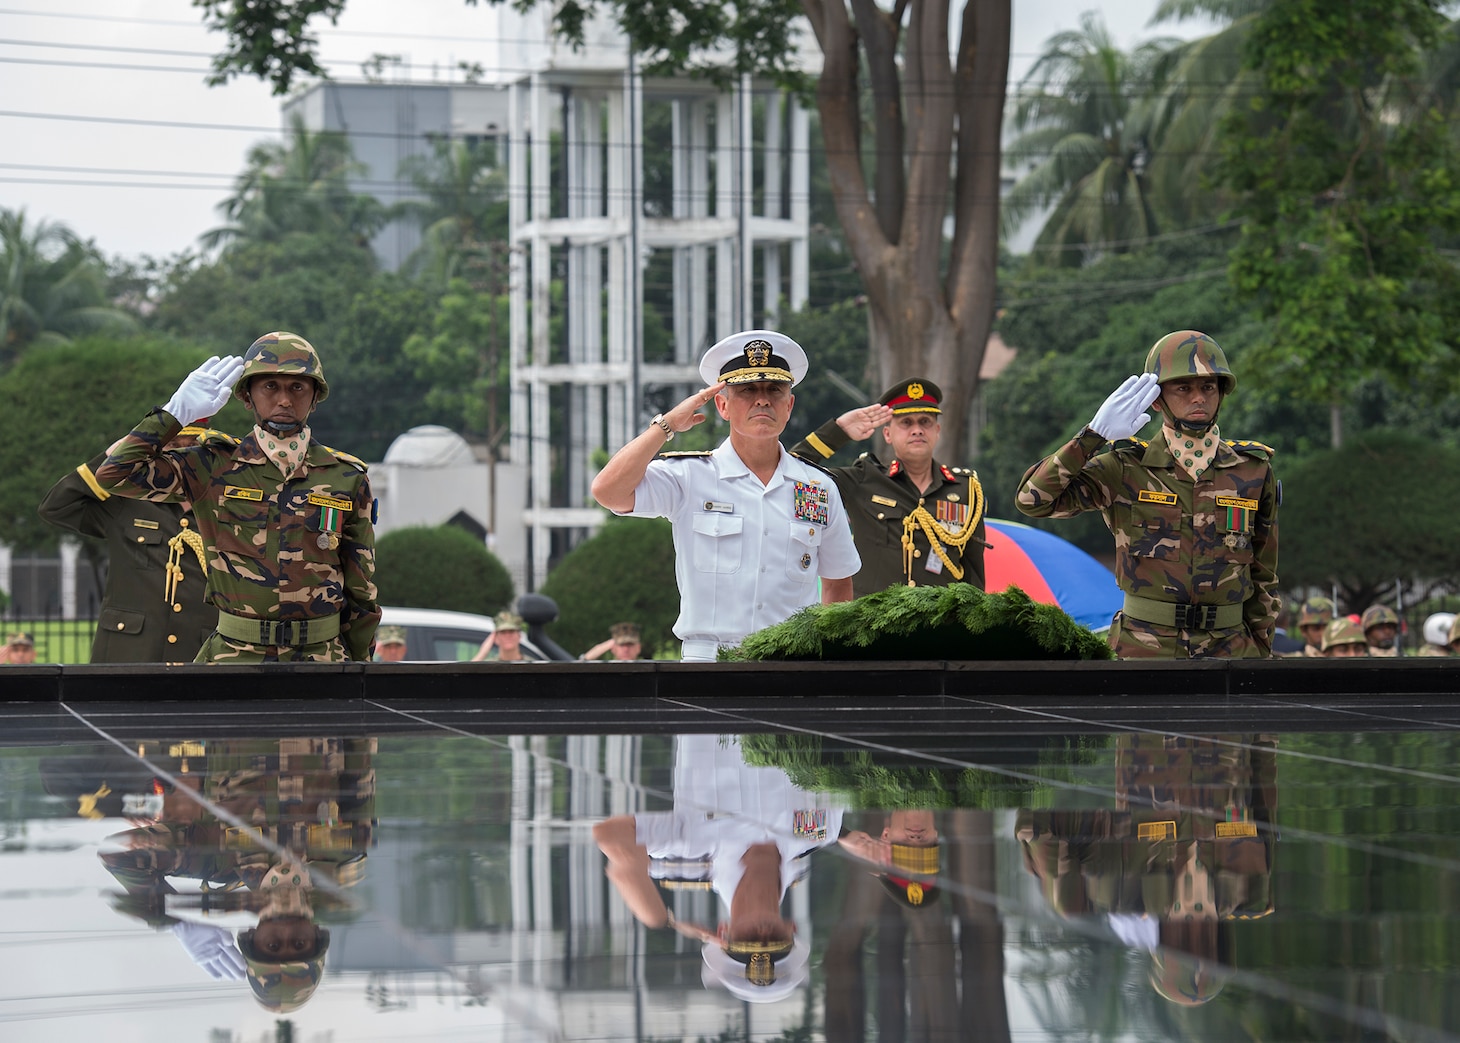 170708-N-WY954-522DHAKA, BANGLADESH (July 8, 2017) – Adm. Harry Harris, Commander U.S. Pacific Command (PACOM), and members of the Bangladesh Army render a salute during a wreath laying ceremony at the Skikha Anirban eternal flame to honor those who sacrificed their lives for Bangladesh’s liberation in 1971. This is Harris’ first visit to Bangladesh as PACOM commander. During the visit he met with counterparts and government officials for discussions on military cooperation and regional security initiatives in the Indo-Asia Pacific. (U.S. Navy photo by Mass Communications Specialist 2nd Class Robin W. Peak/ Released)